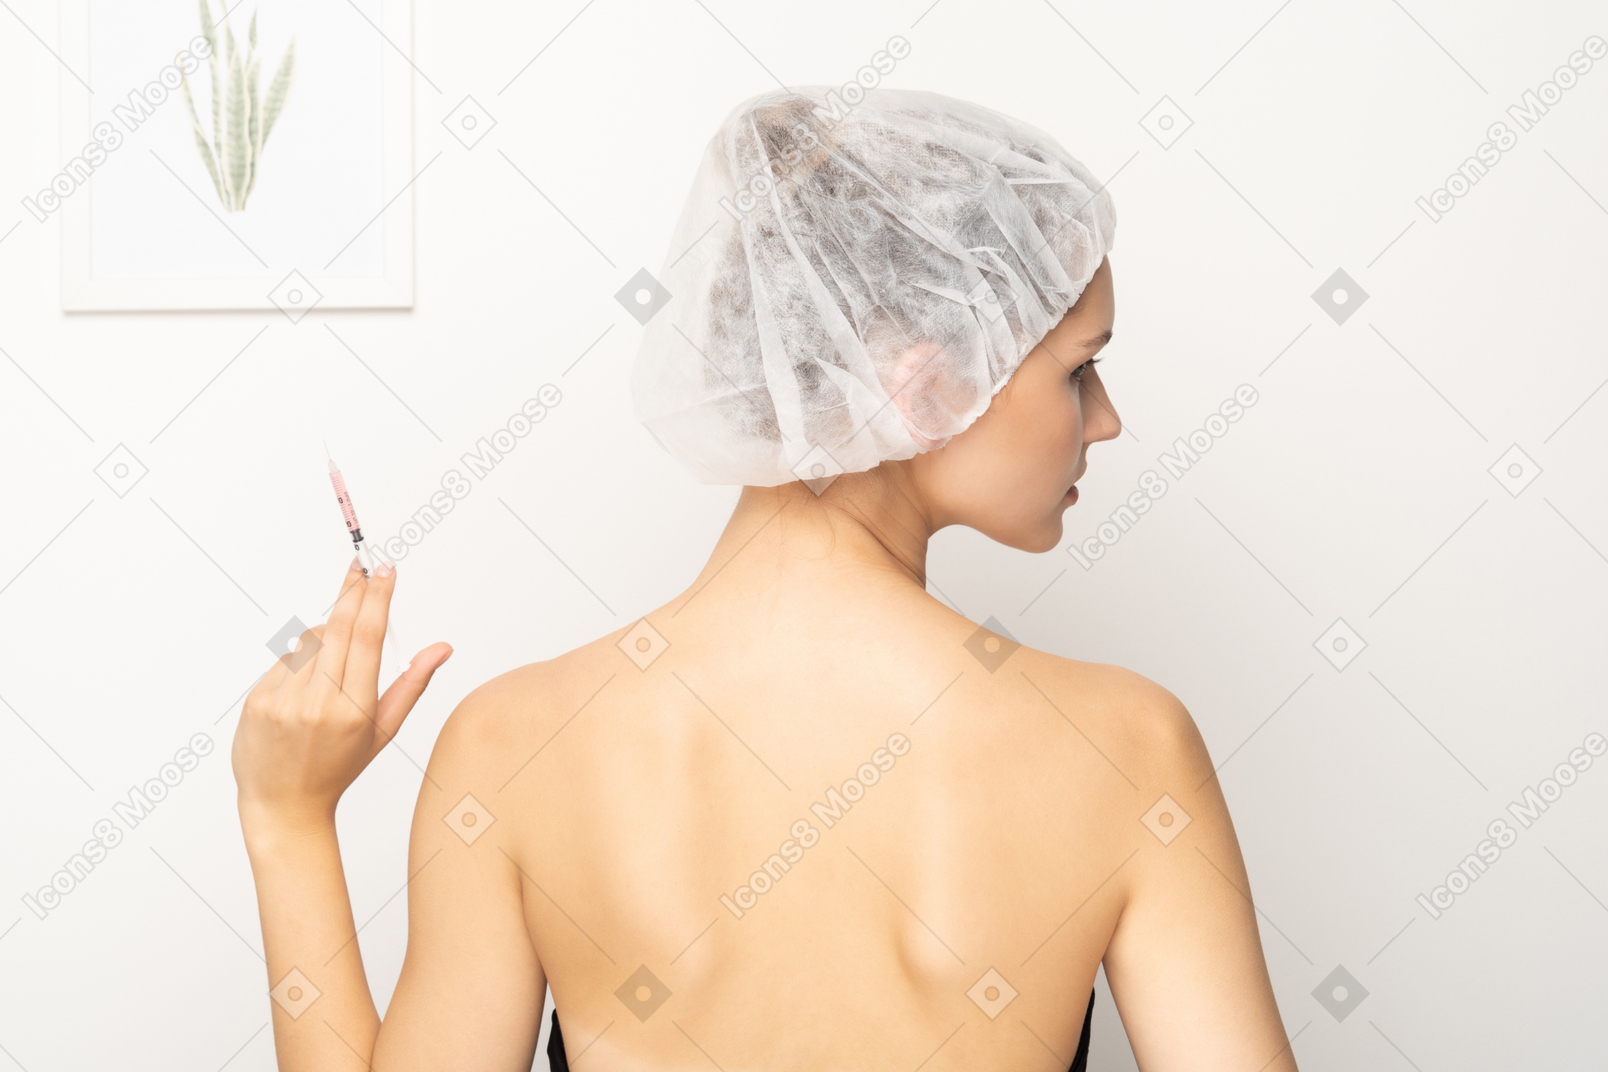 Rear view of a young woman with syringe